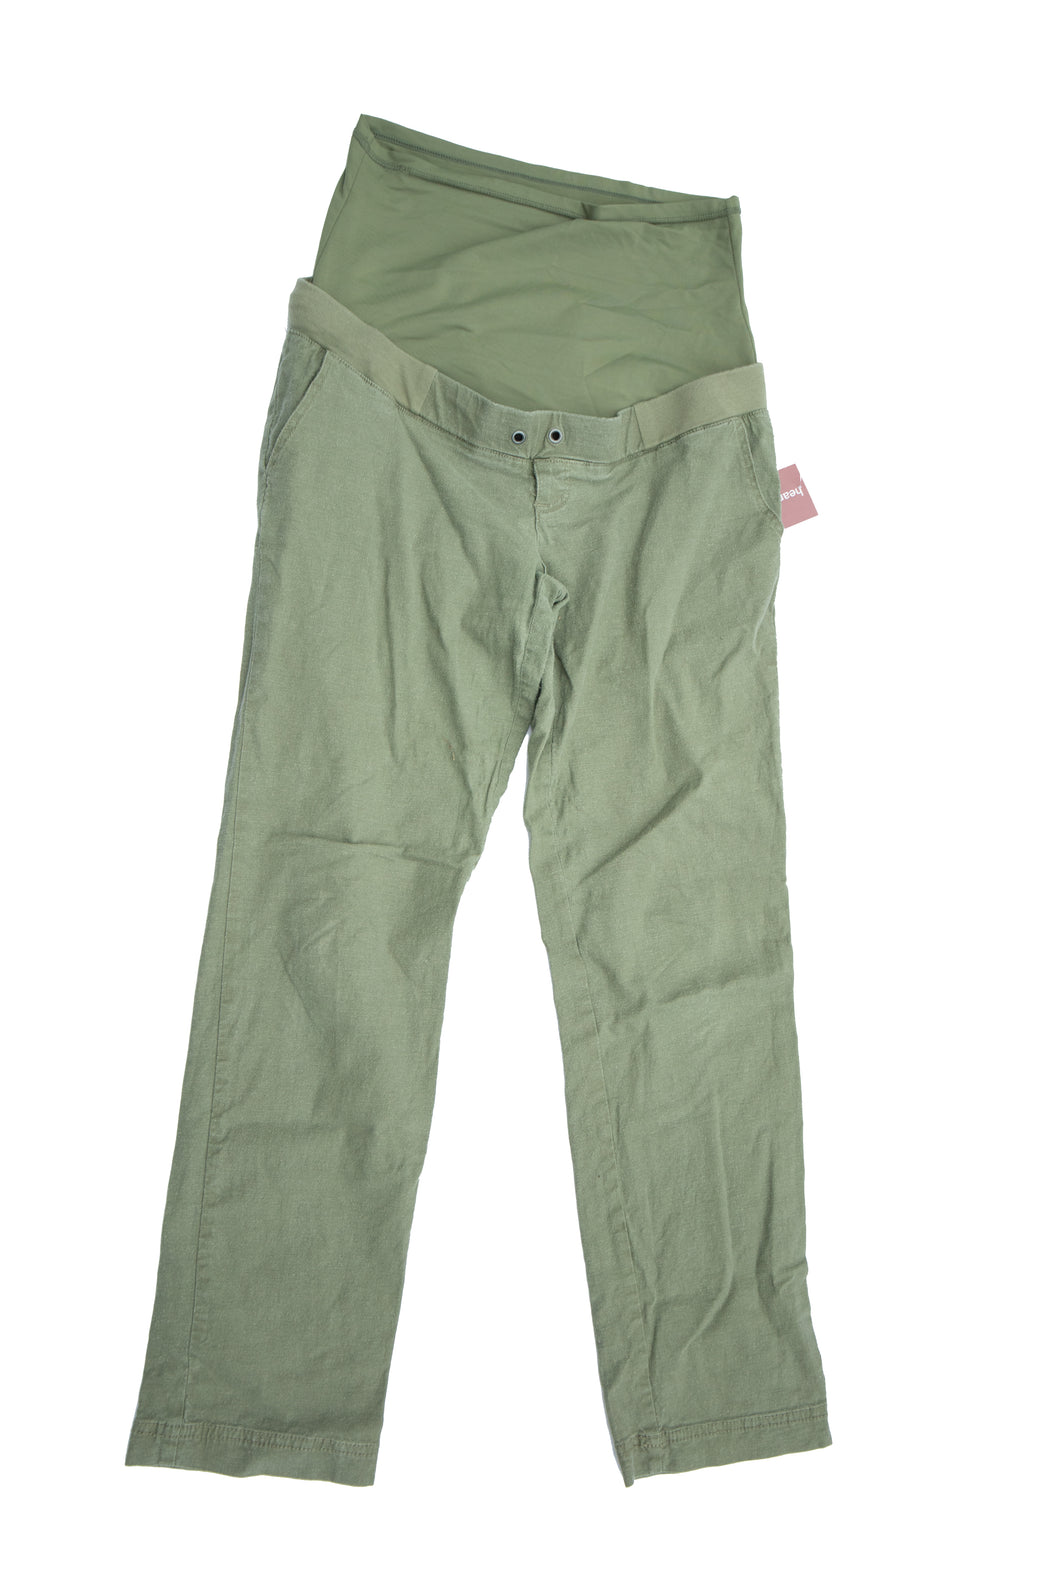 CLEARANCE M Thyme maternity Green Linen Pants